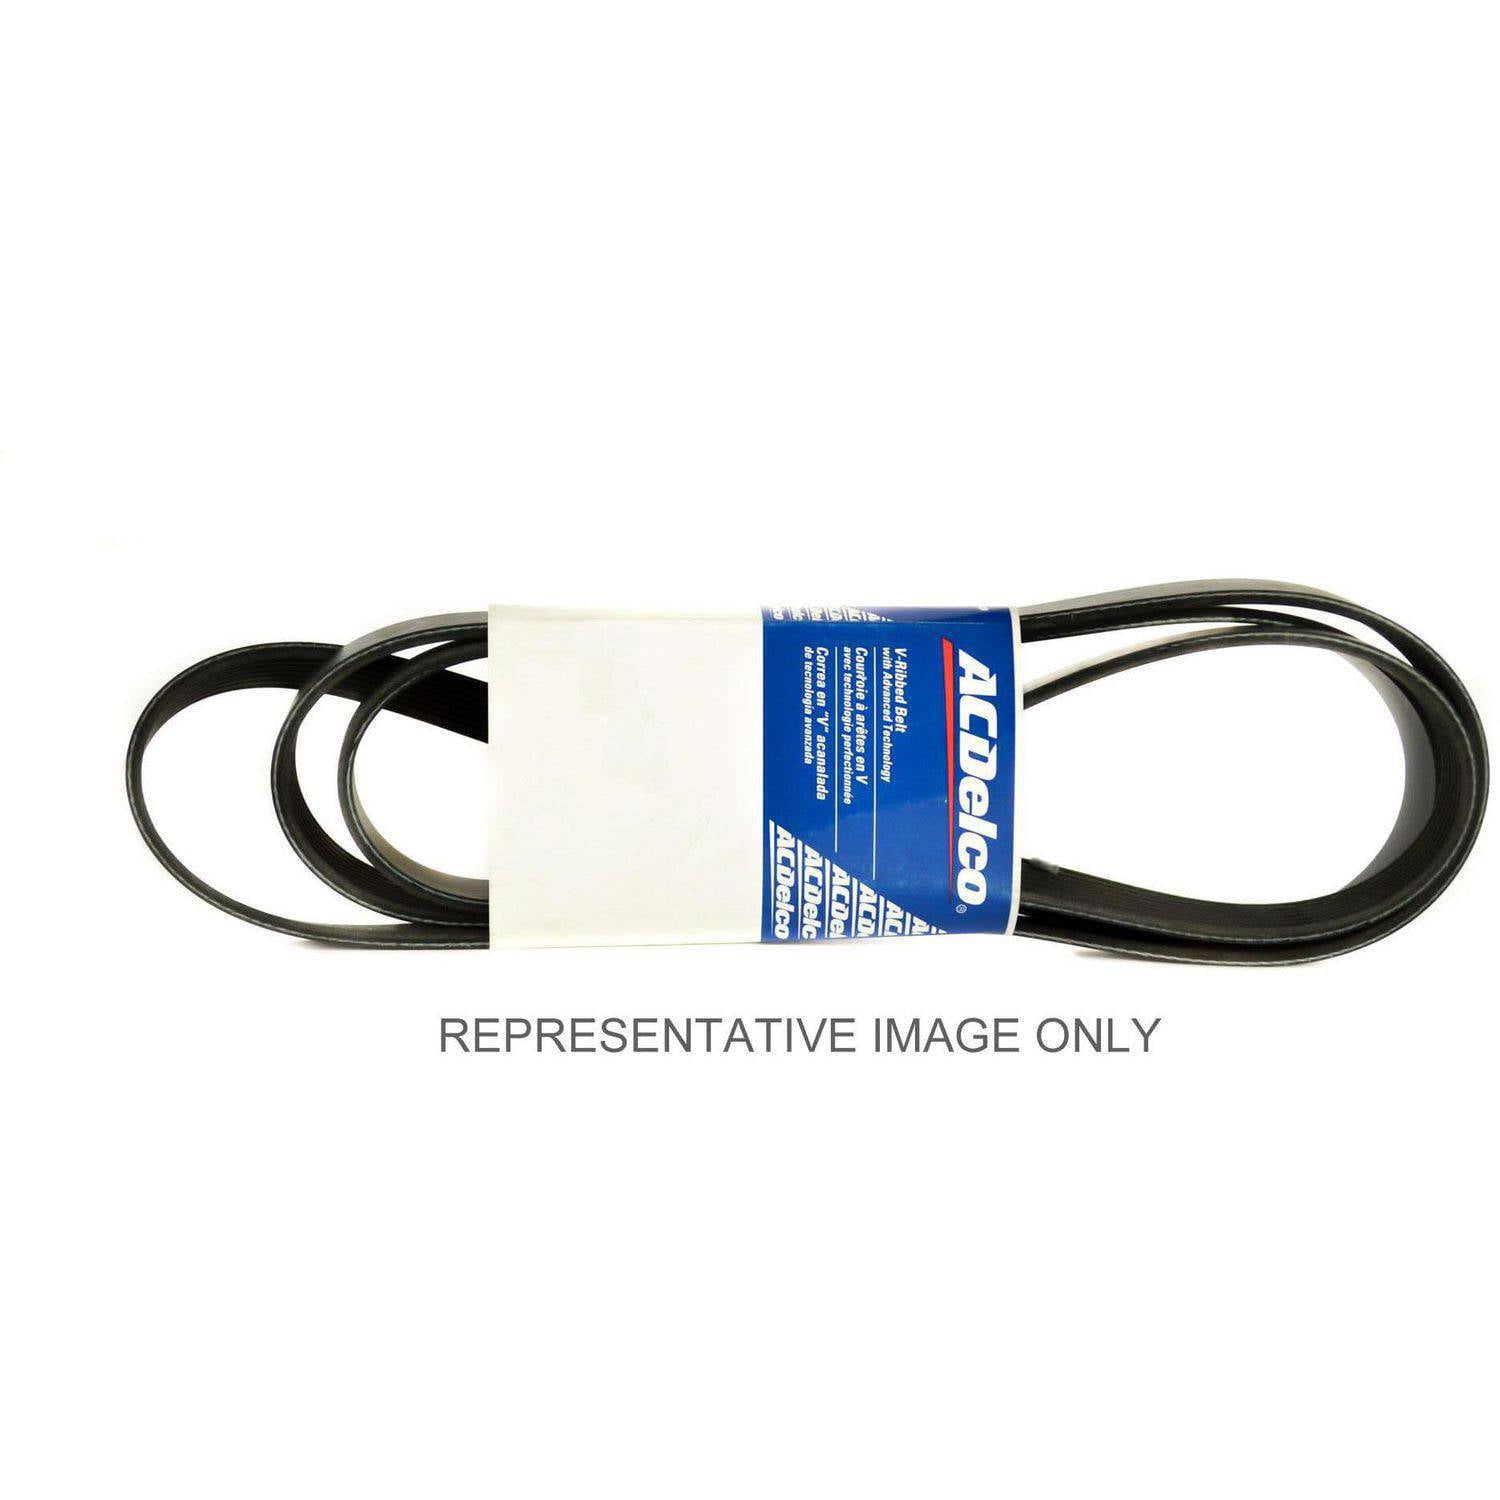 AC DELCO 6K480 Replacement Belt 